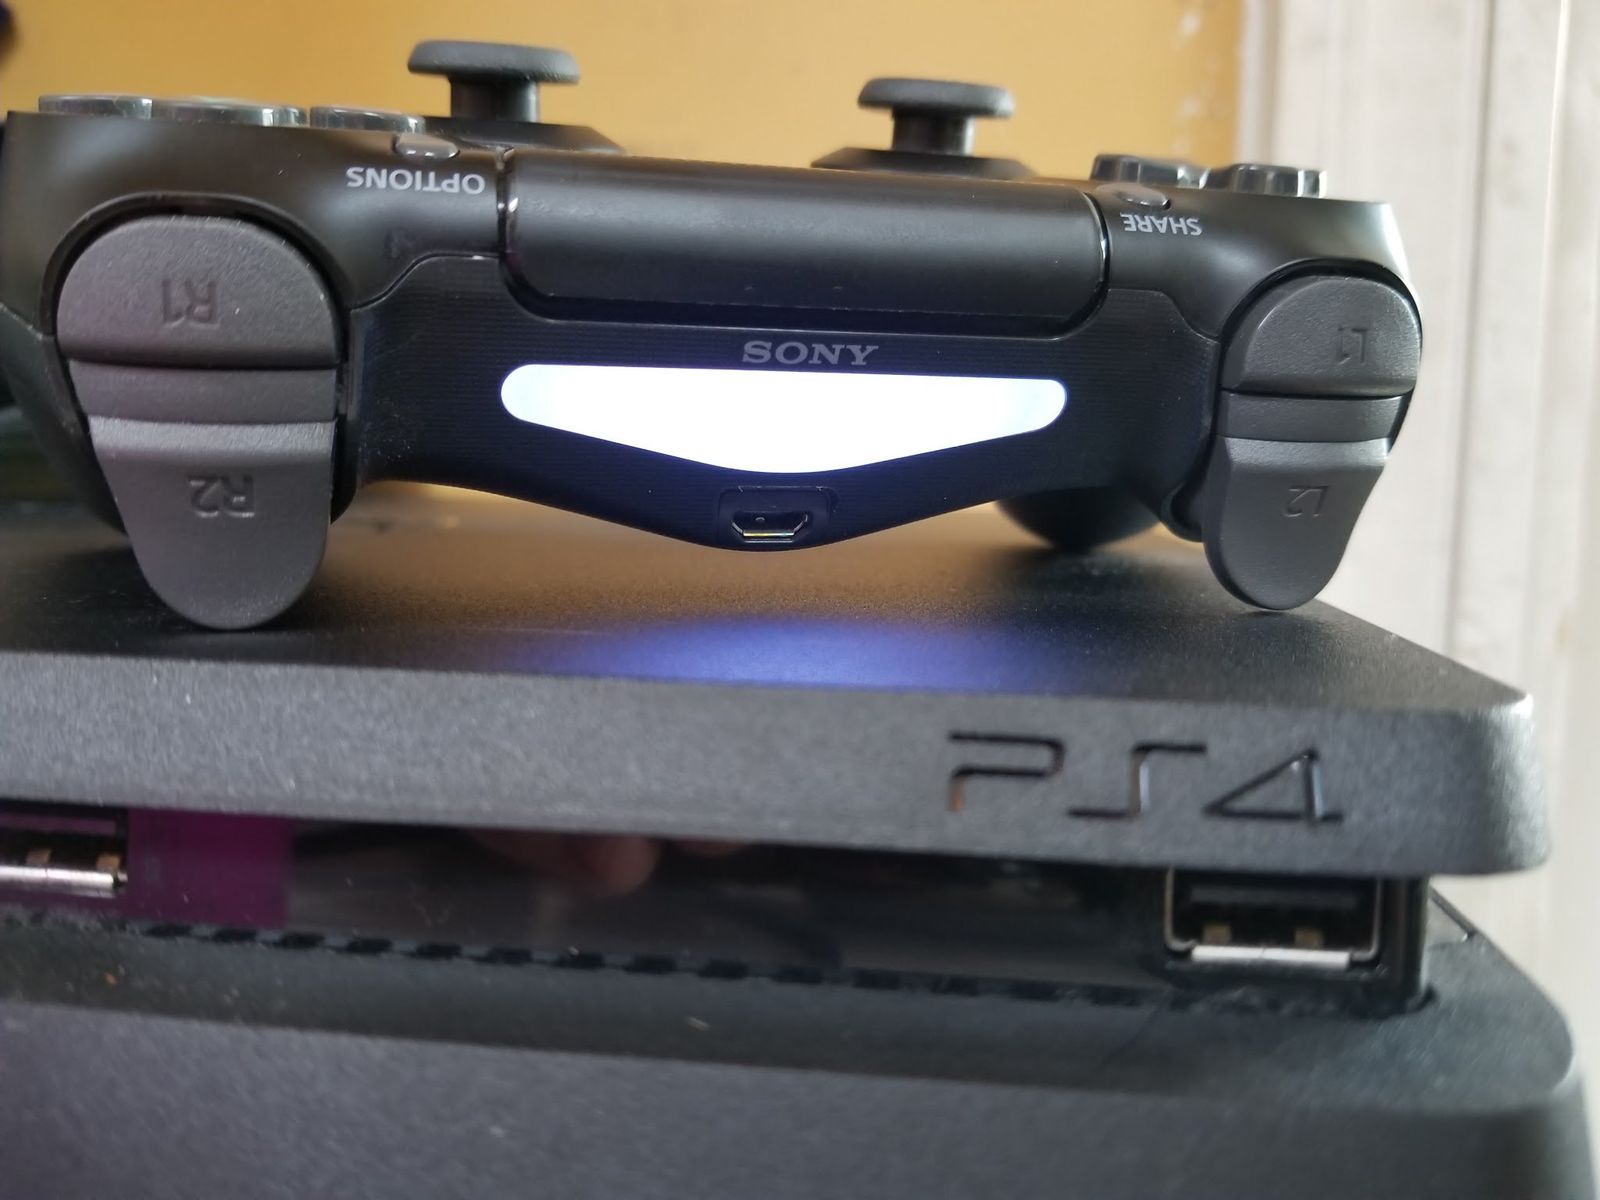 places that fixes ps4 consoles near me